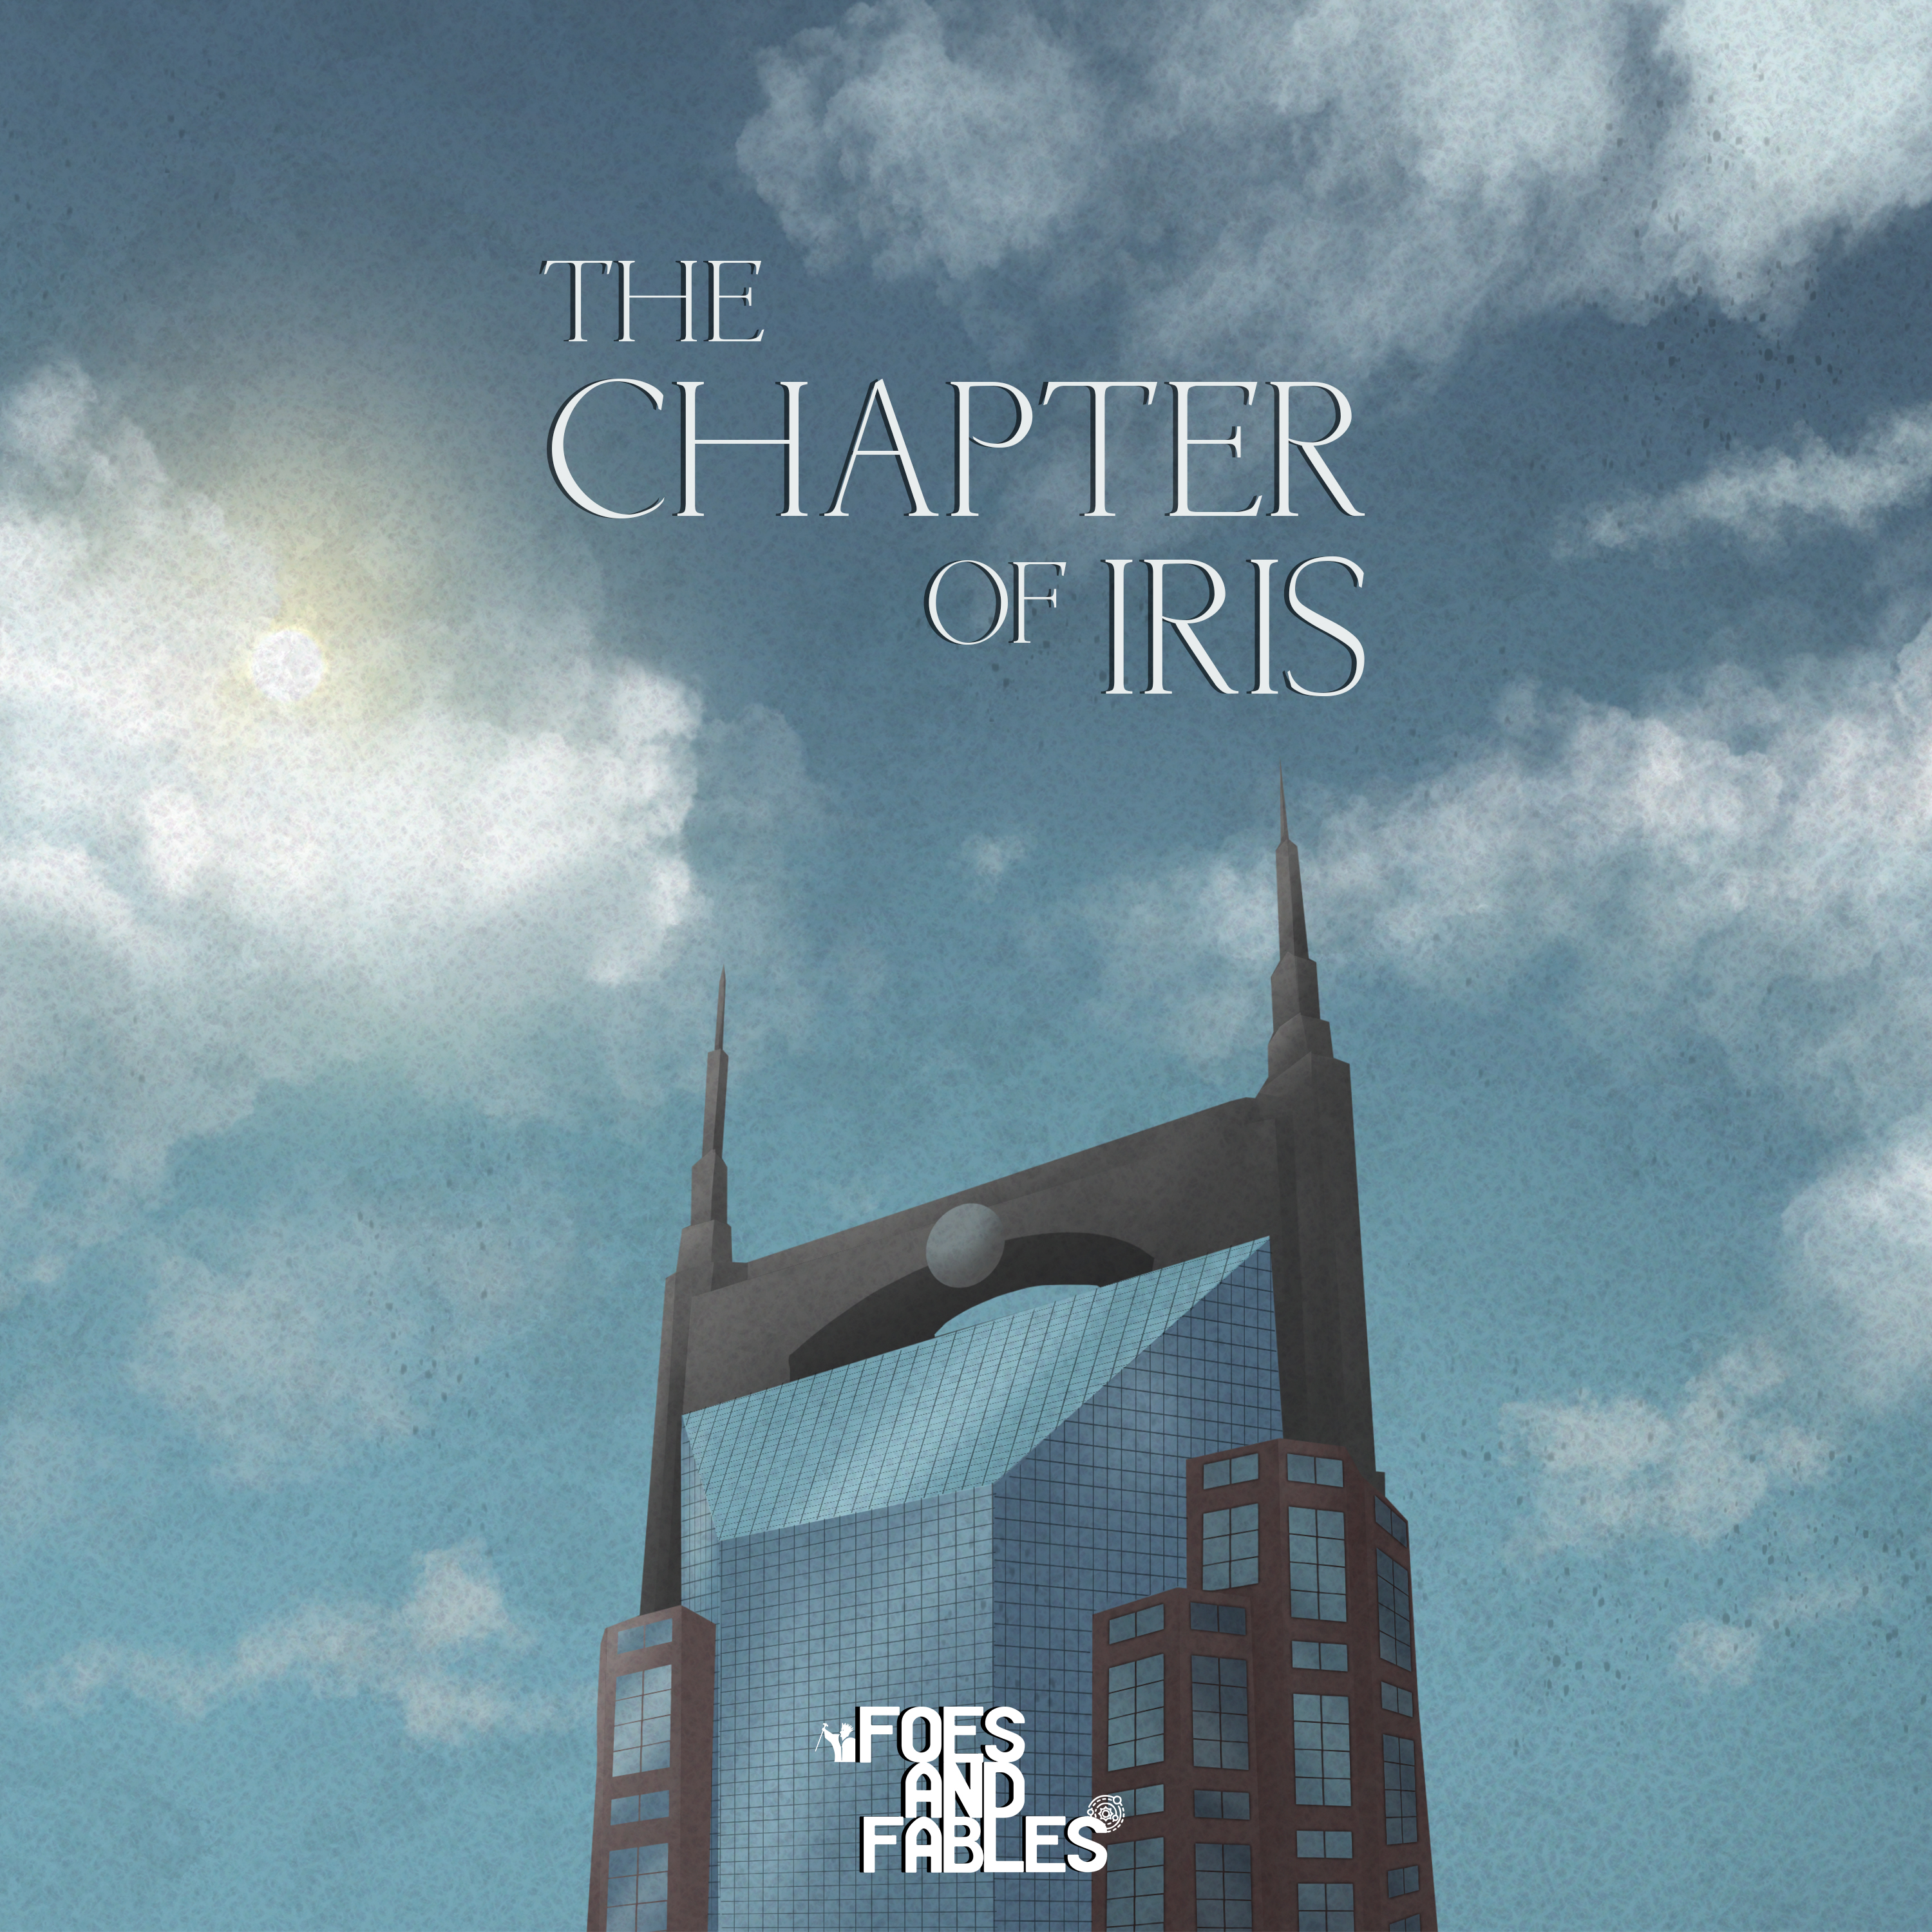 8. The Deck of Many Things (Part 2) | The Chapter of Iris